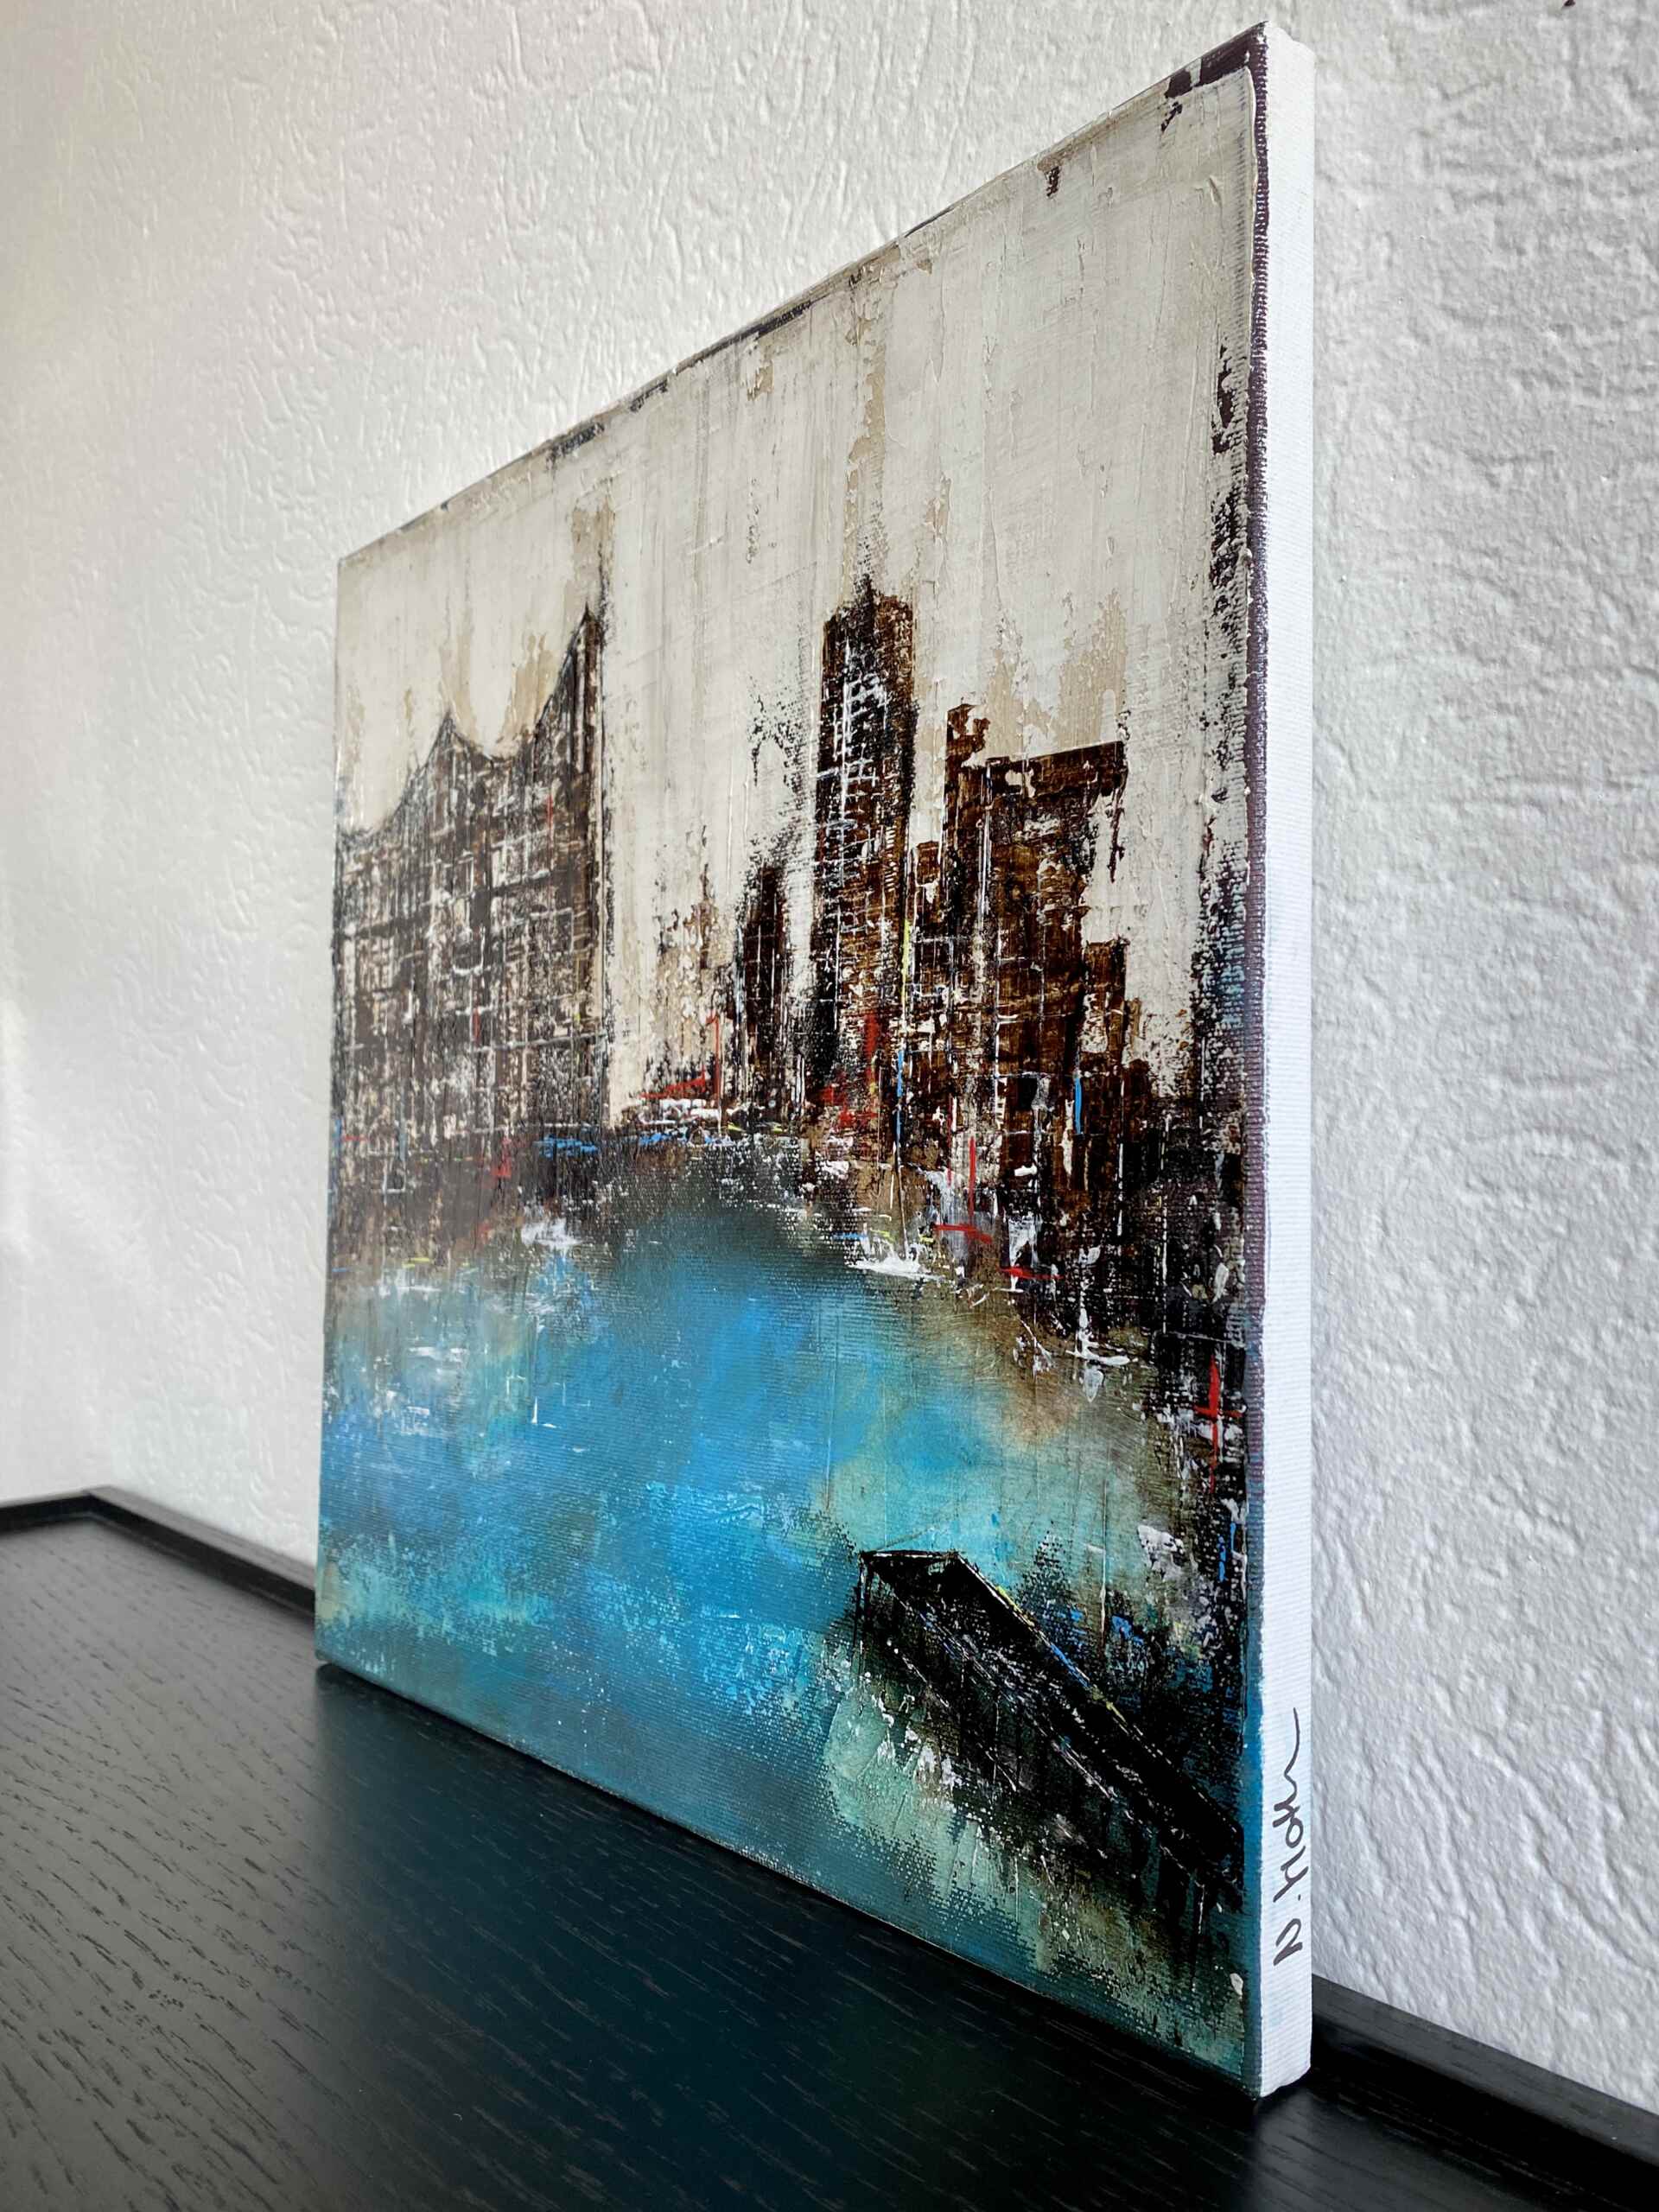 Side view of artwork "Elbe View No 1" by Nina Groth